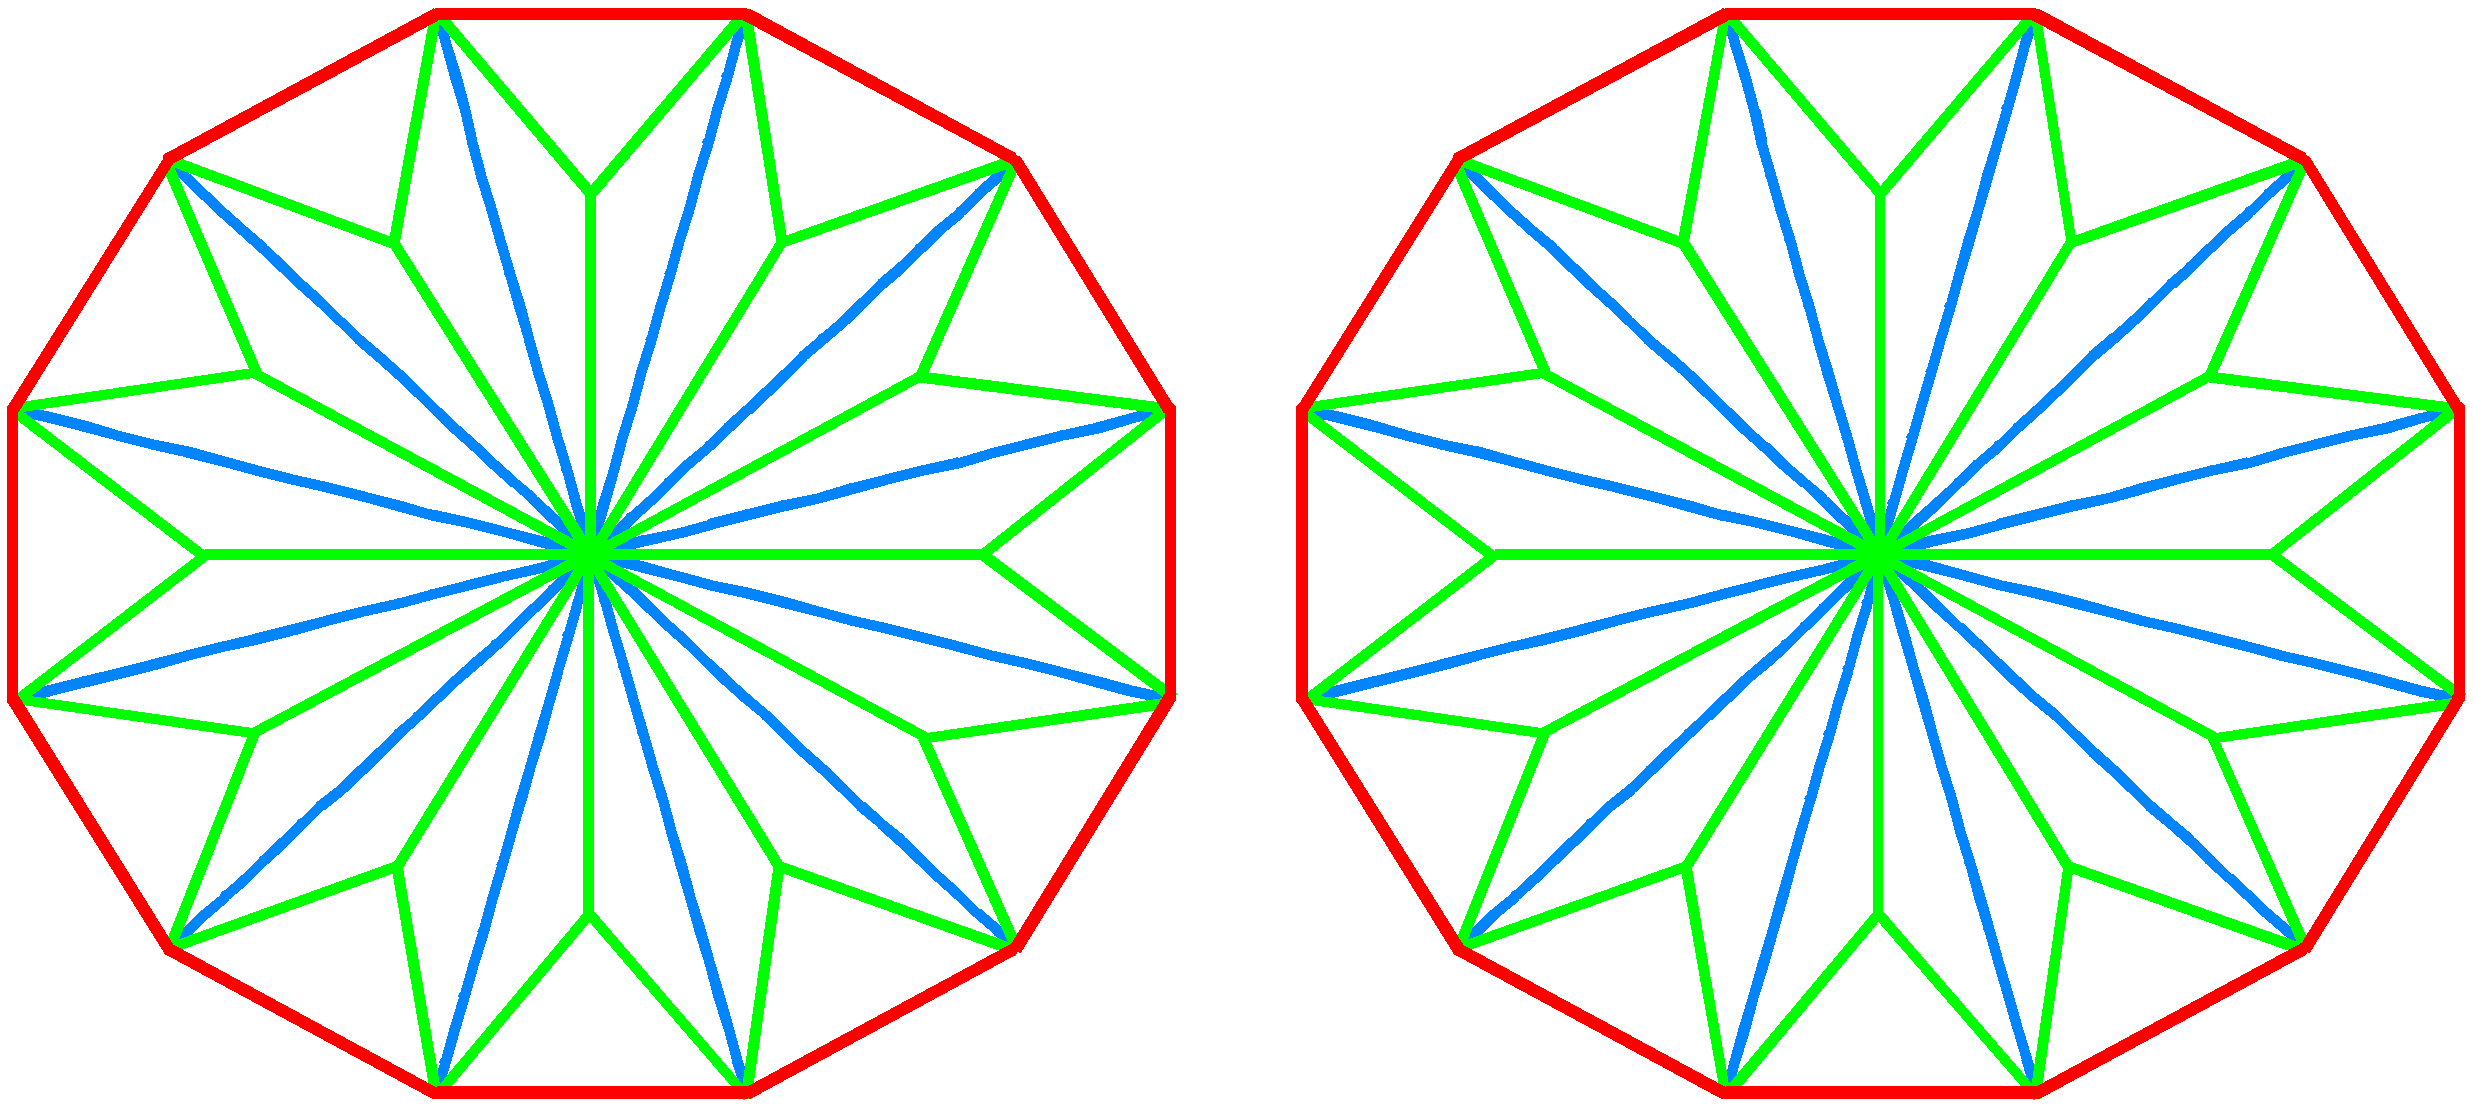 Two Type A dodecagons